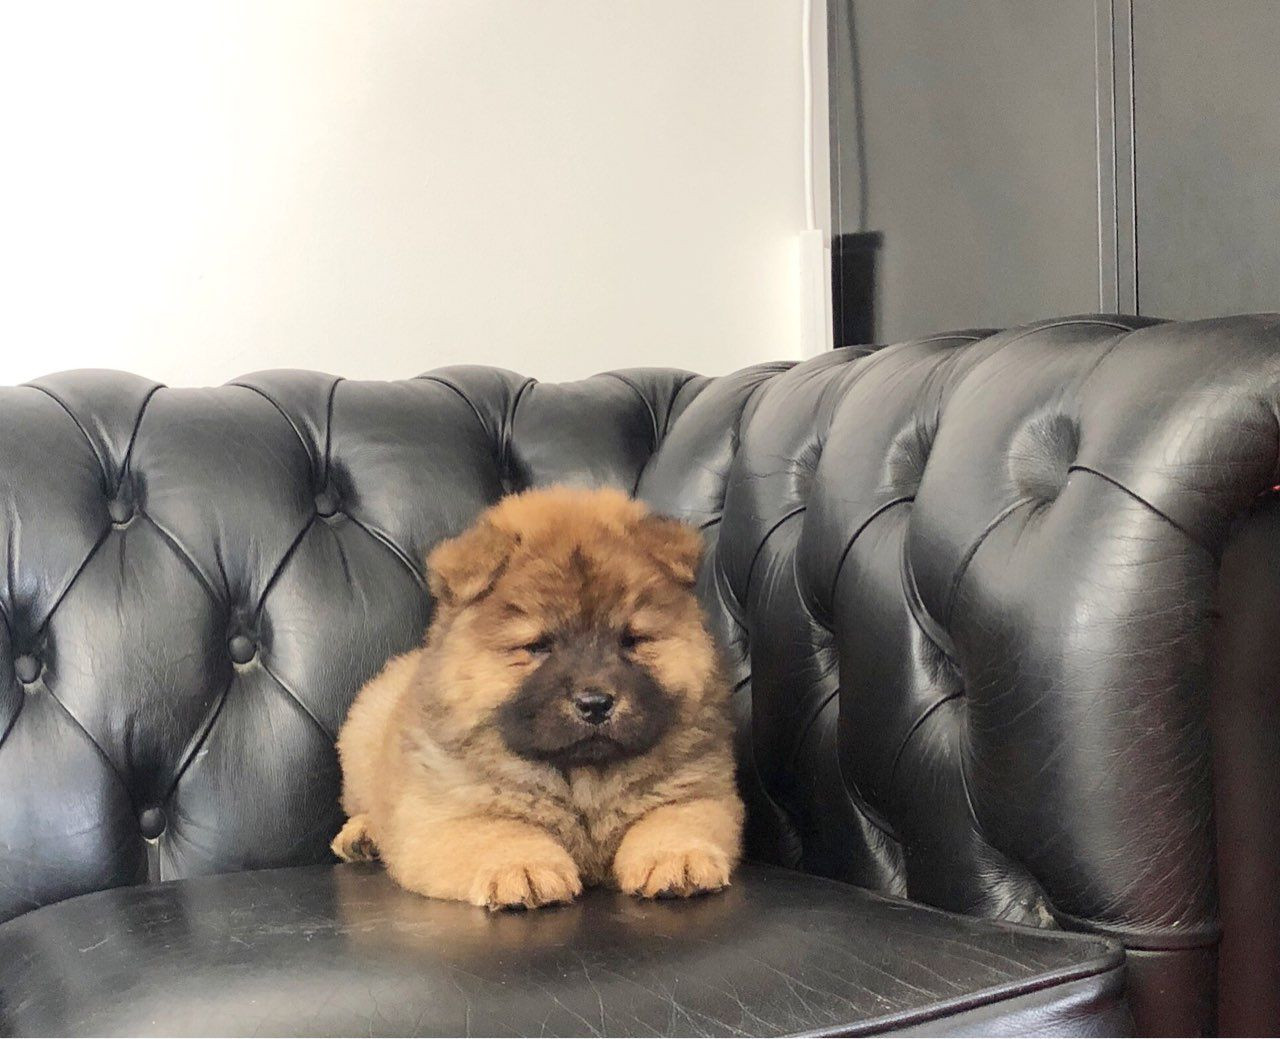 Chow Chow Puppies For Sale Houston, TX 283185 Petzlover